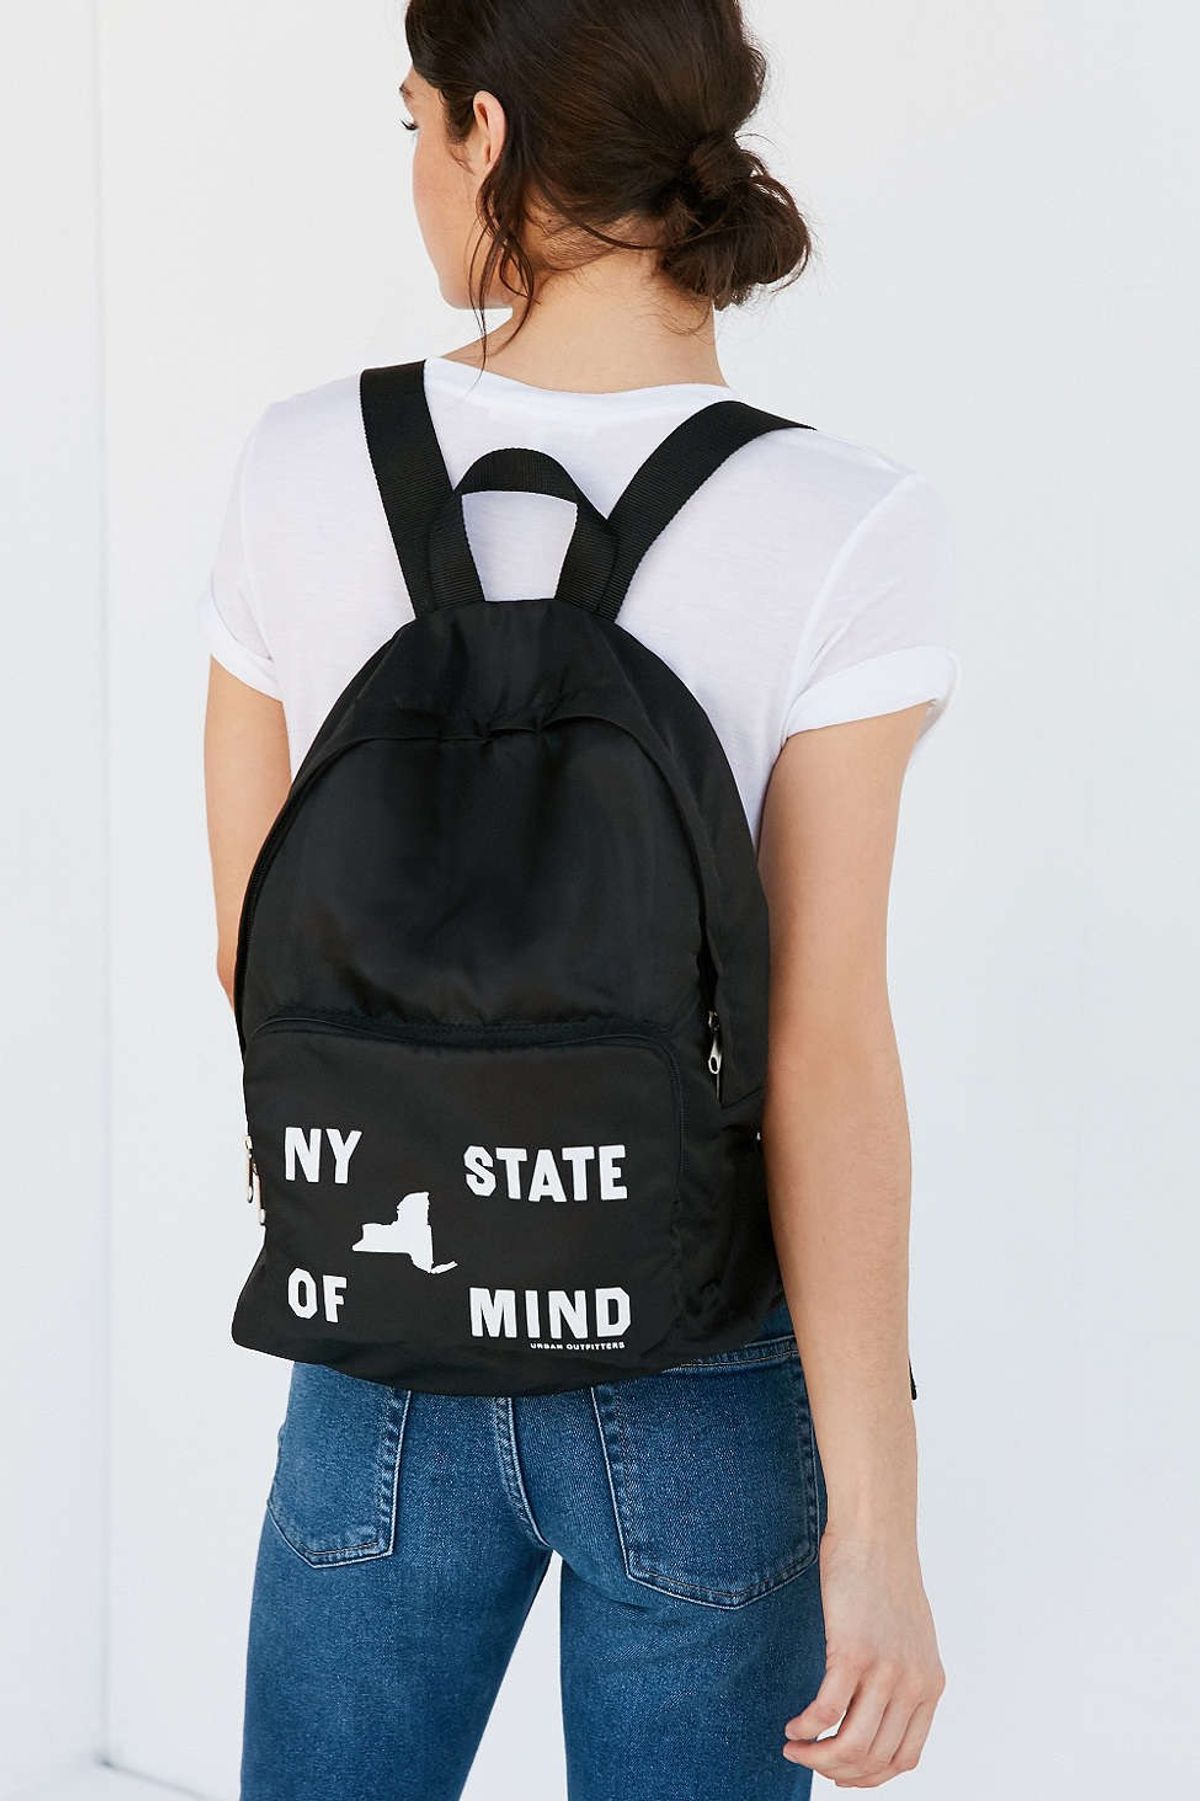 10 Backpacks For The Fashionista